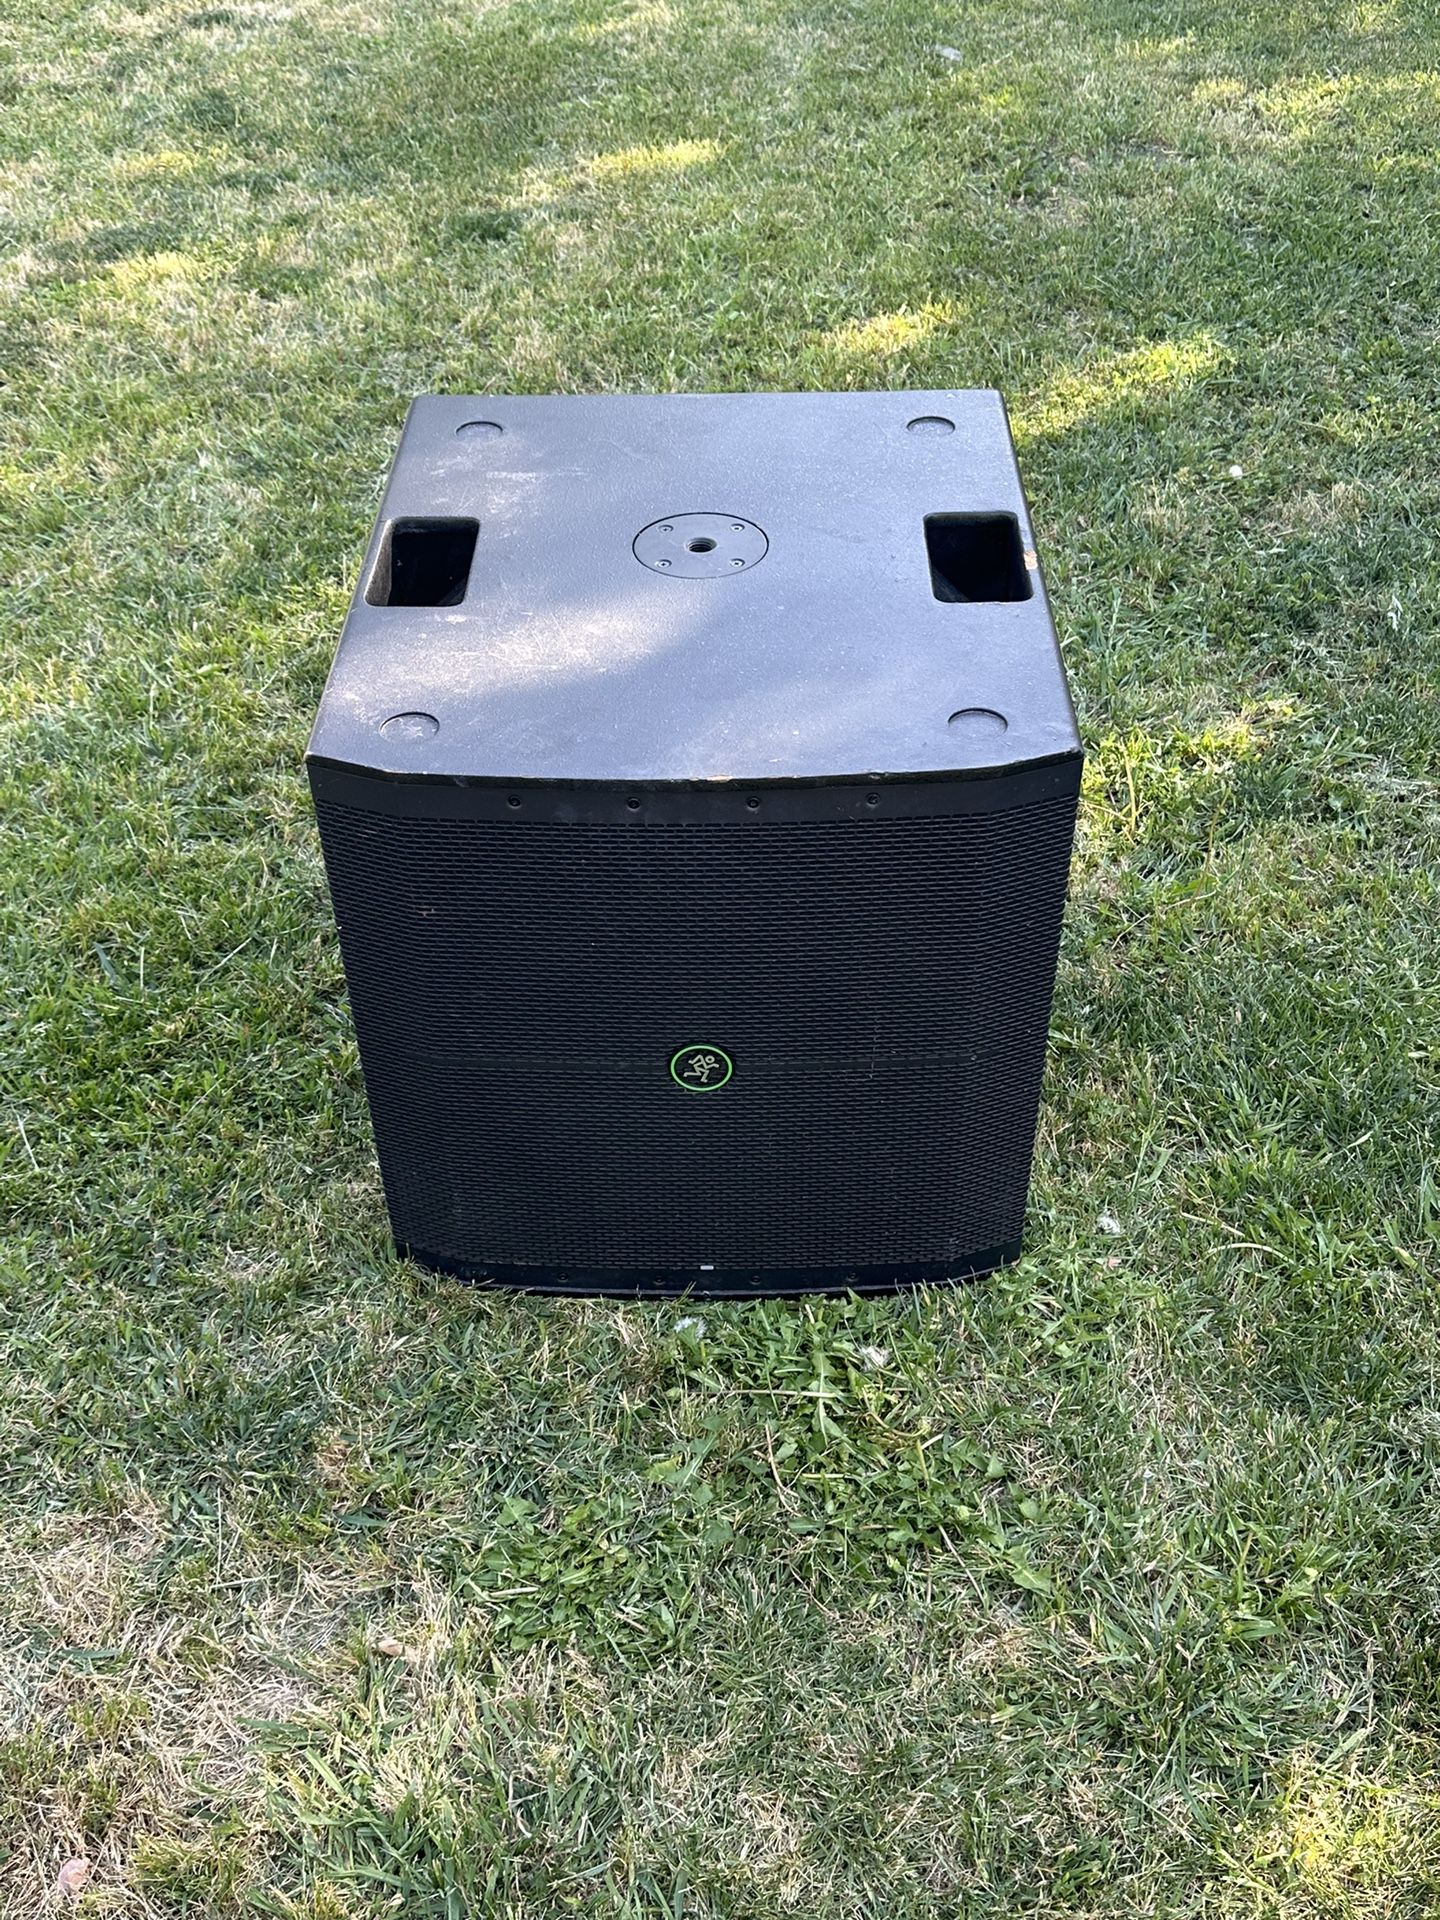 mackie thump 118s Powered Subwoofer 